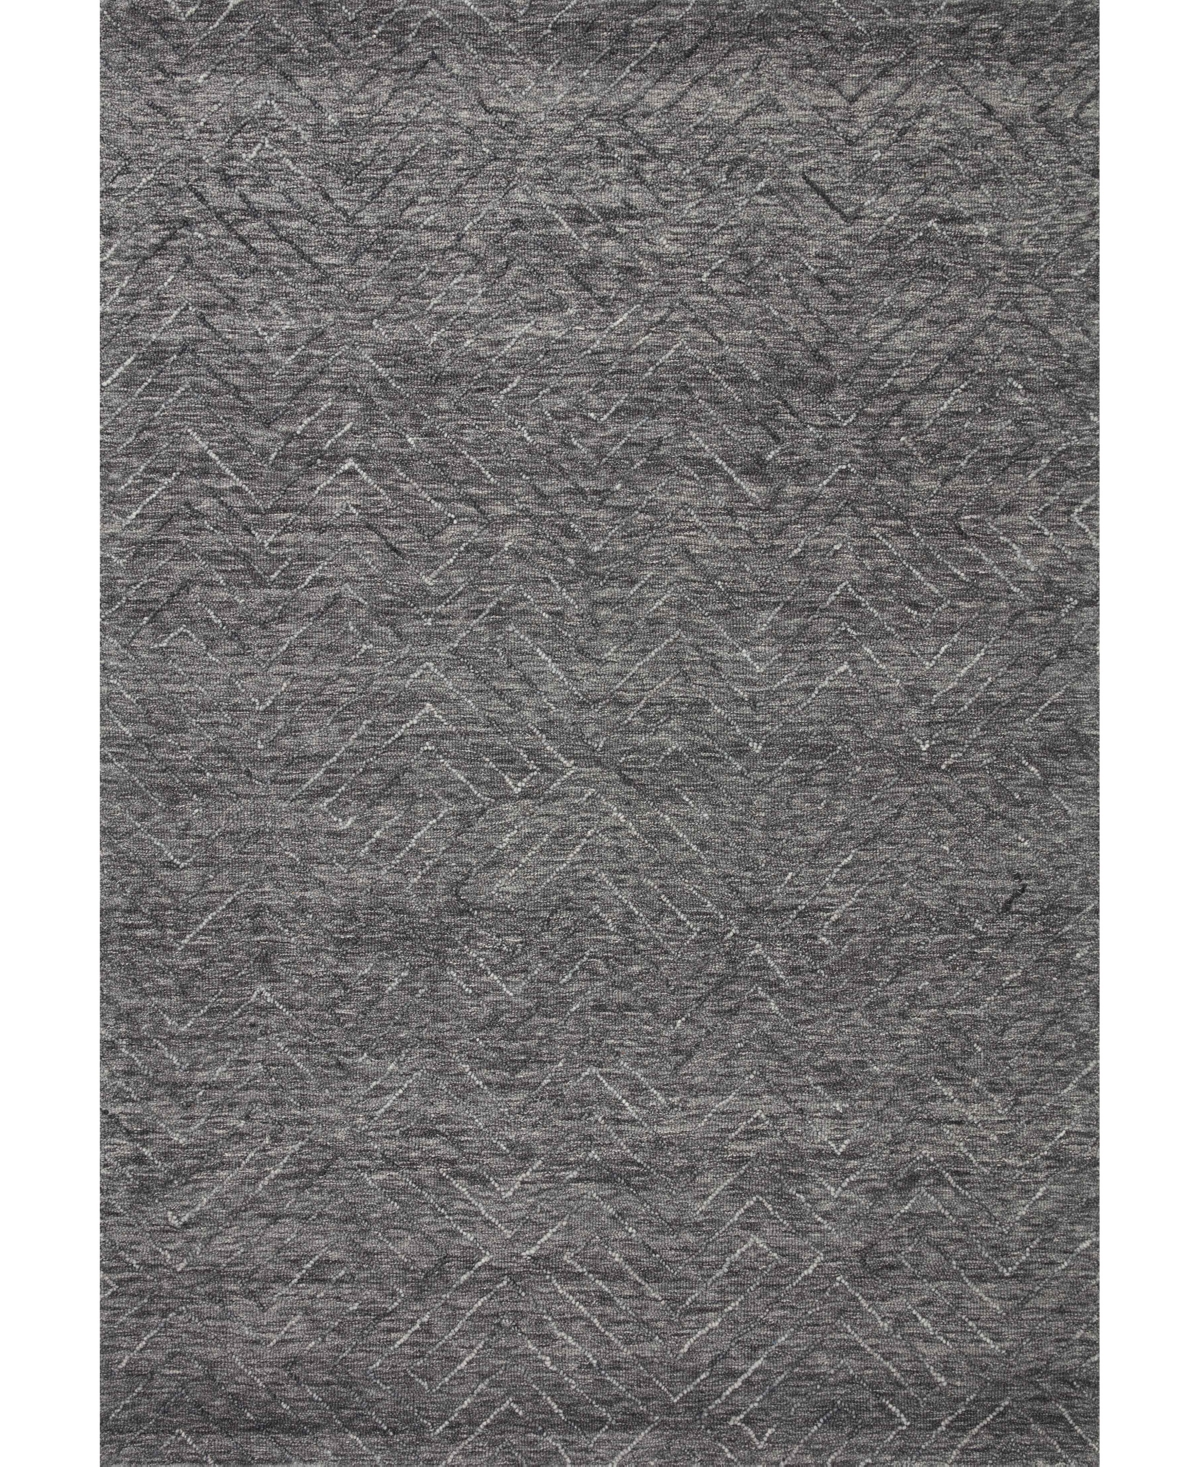 Magnolia Home By Joanna Gaines X Loloi Sarah Sar-03 5' X 7'6" Area Rug In Charcoal